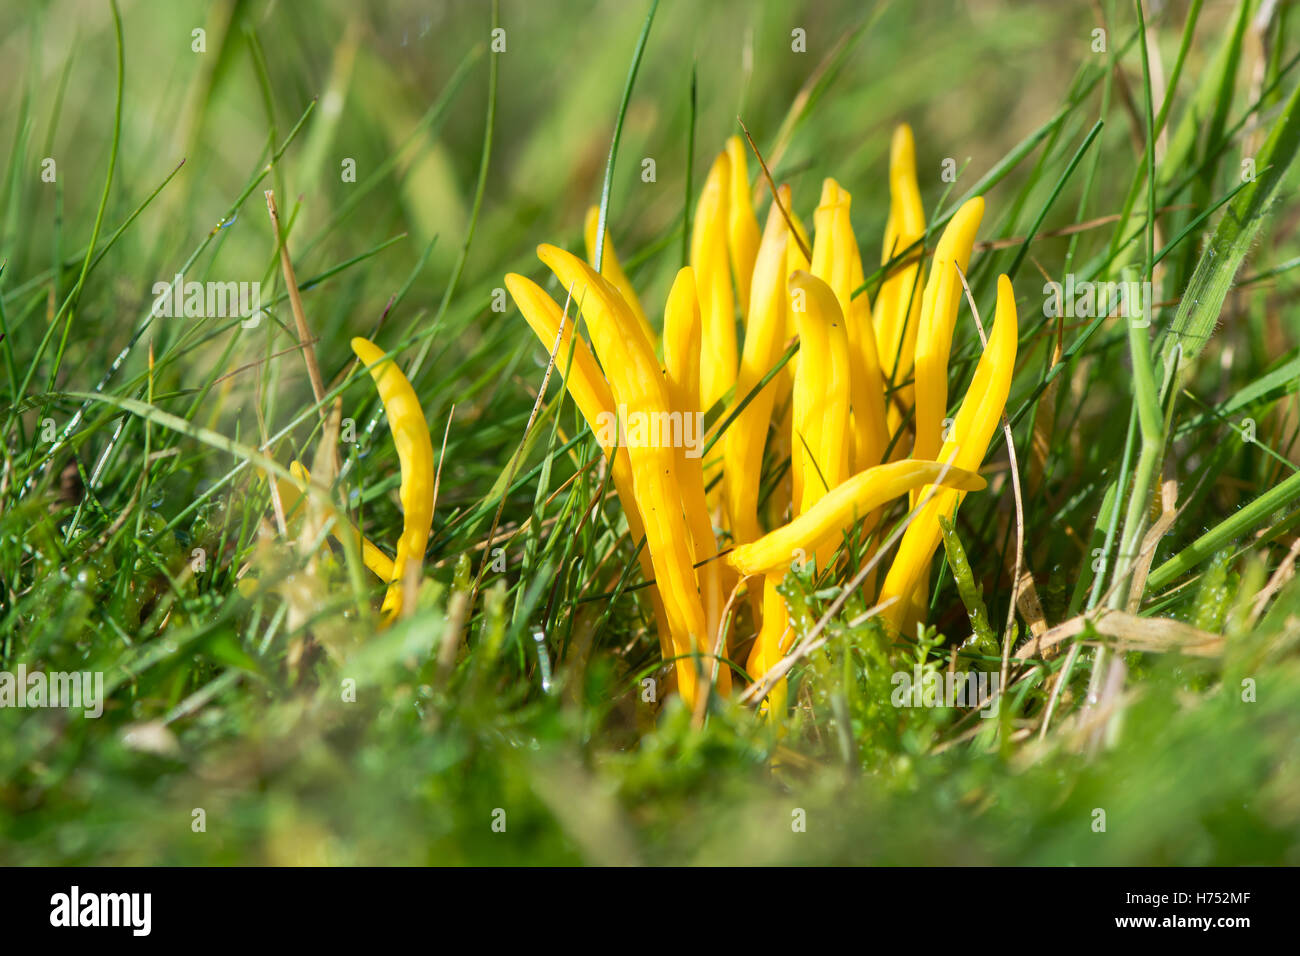 Golden spindles (Clavulinopsis fusiformis) fungi. Bright yellow fungus in dense tuft, in the family Clavariaceae Stock Photo